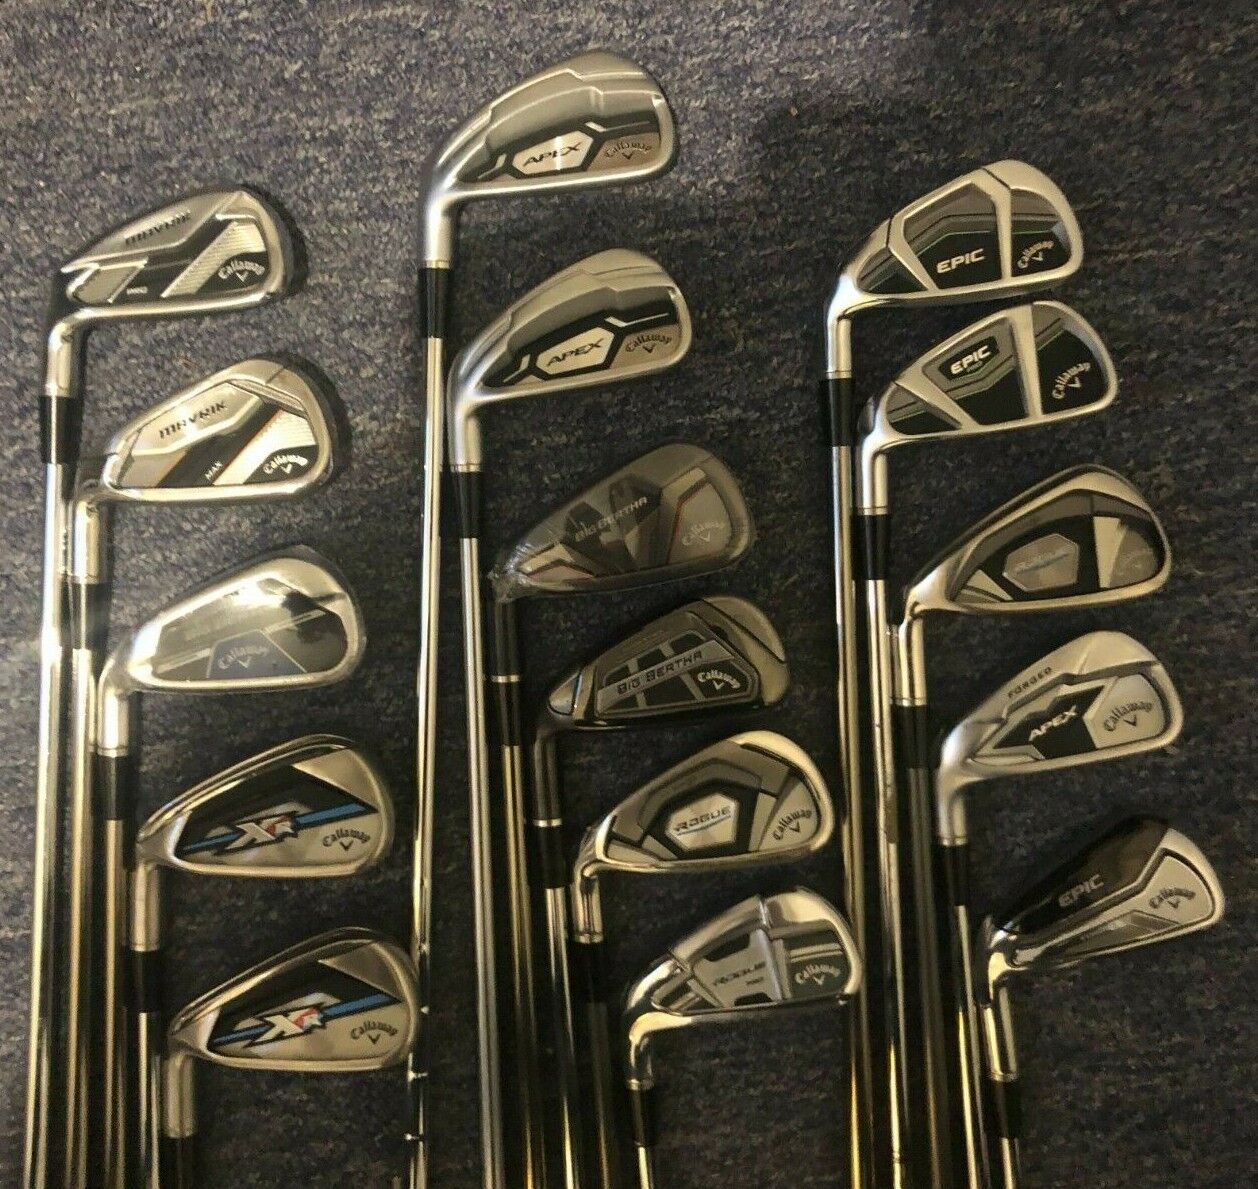 Callaway 7 Iron, Single Iron, Choose Model, Left Handed, Authentic Demo Irons